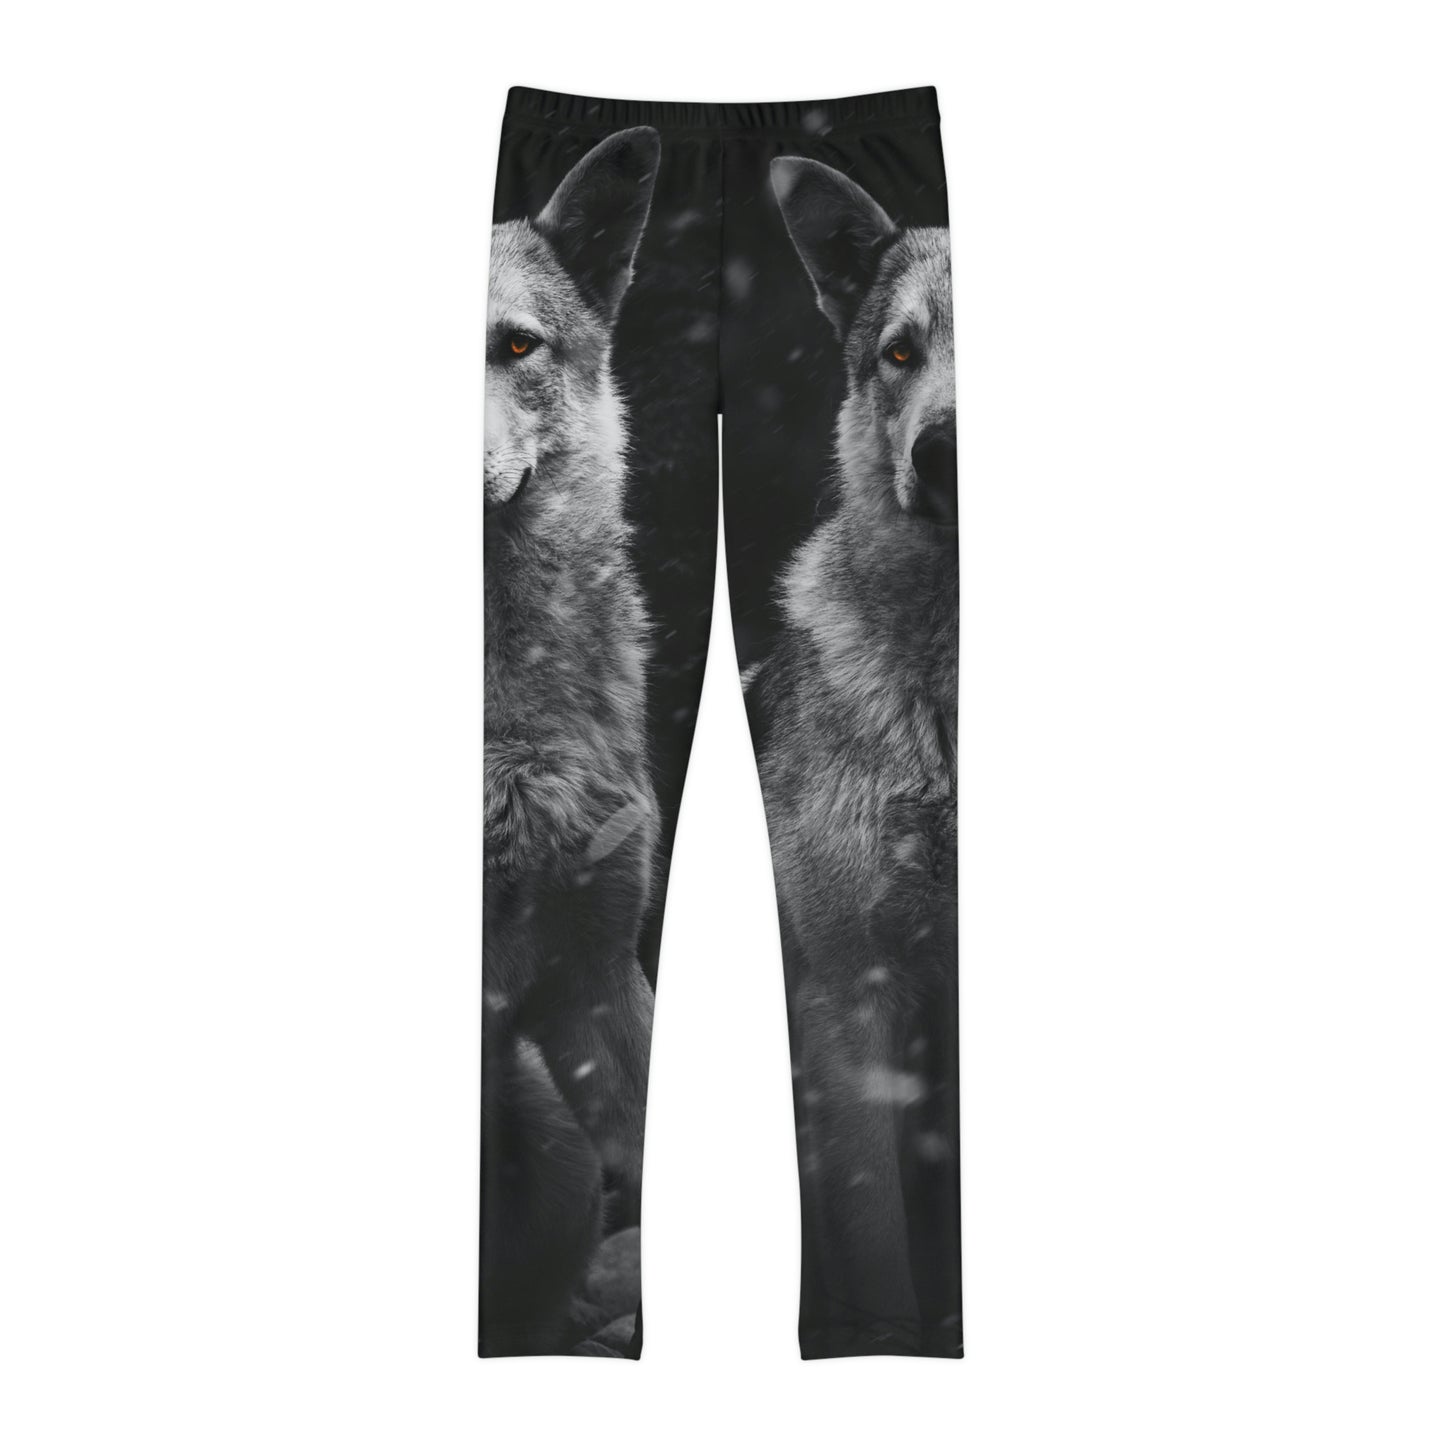 Fox animal kingdom, Safari Youth Leggings,  One of a Kind Gift - Unique Workout Activewear tights for kids, Daughter, Niece  Christmas Gift